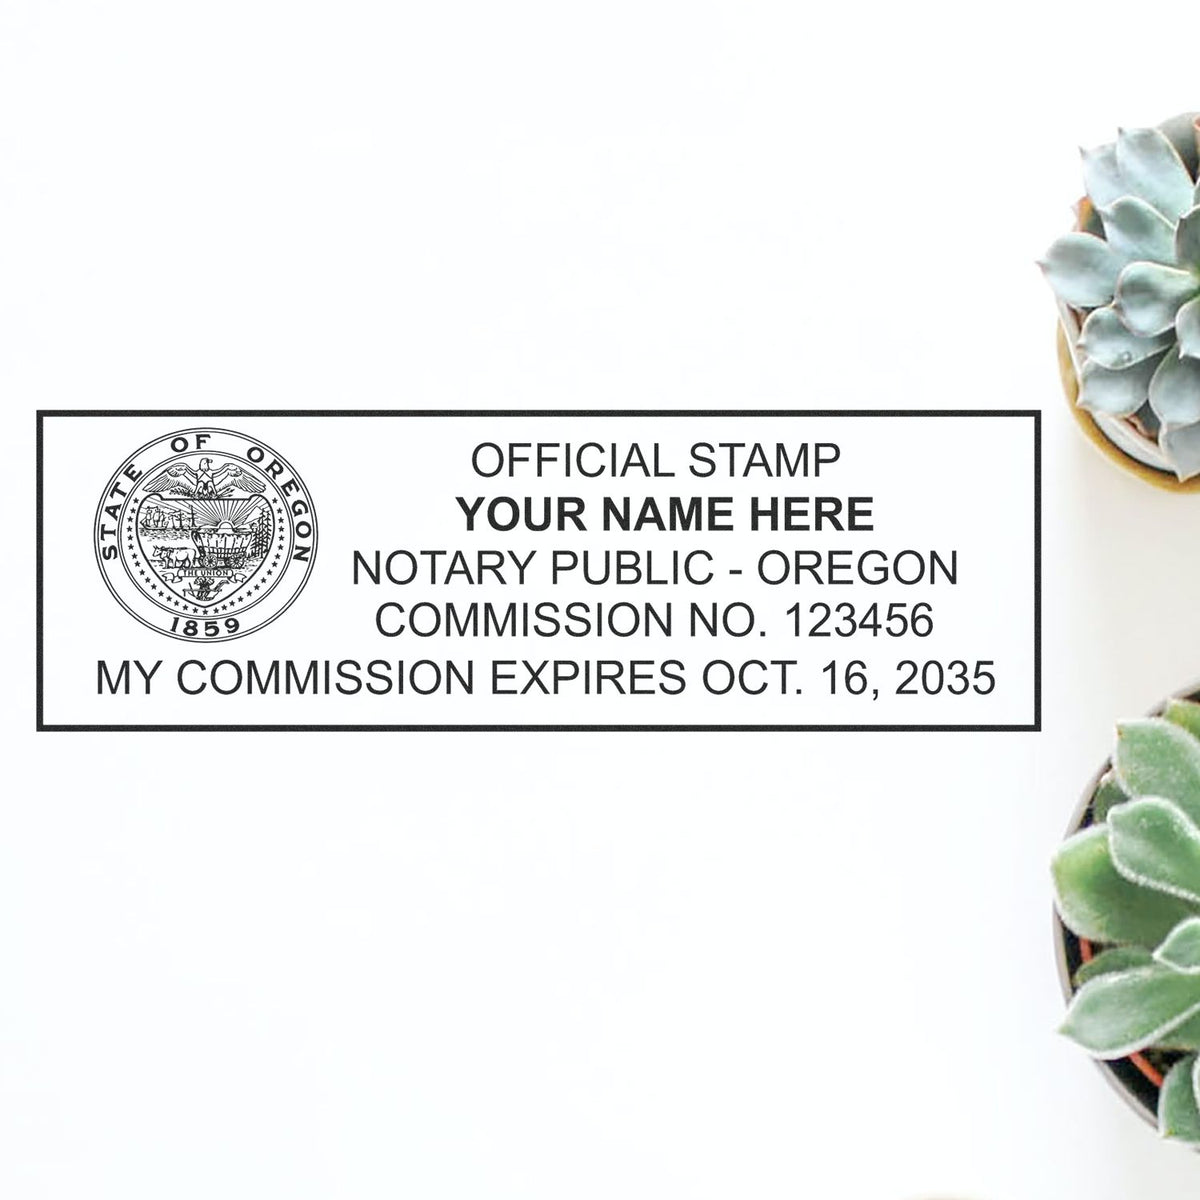 A stamped impression of the Wooden Handle Oregon Rectangular Notary Public Stamp in this stylish lifestyle photo, setting the tone for a unique and personalized product.